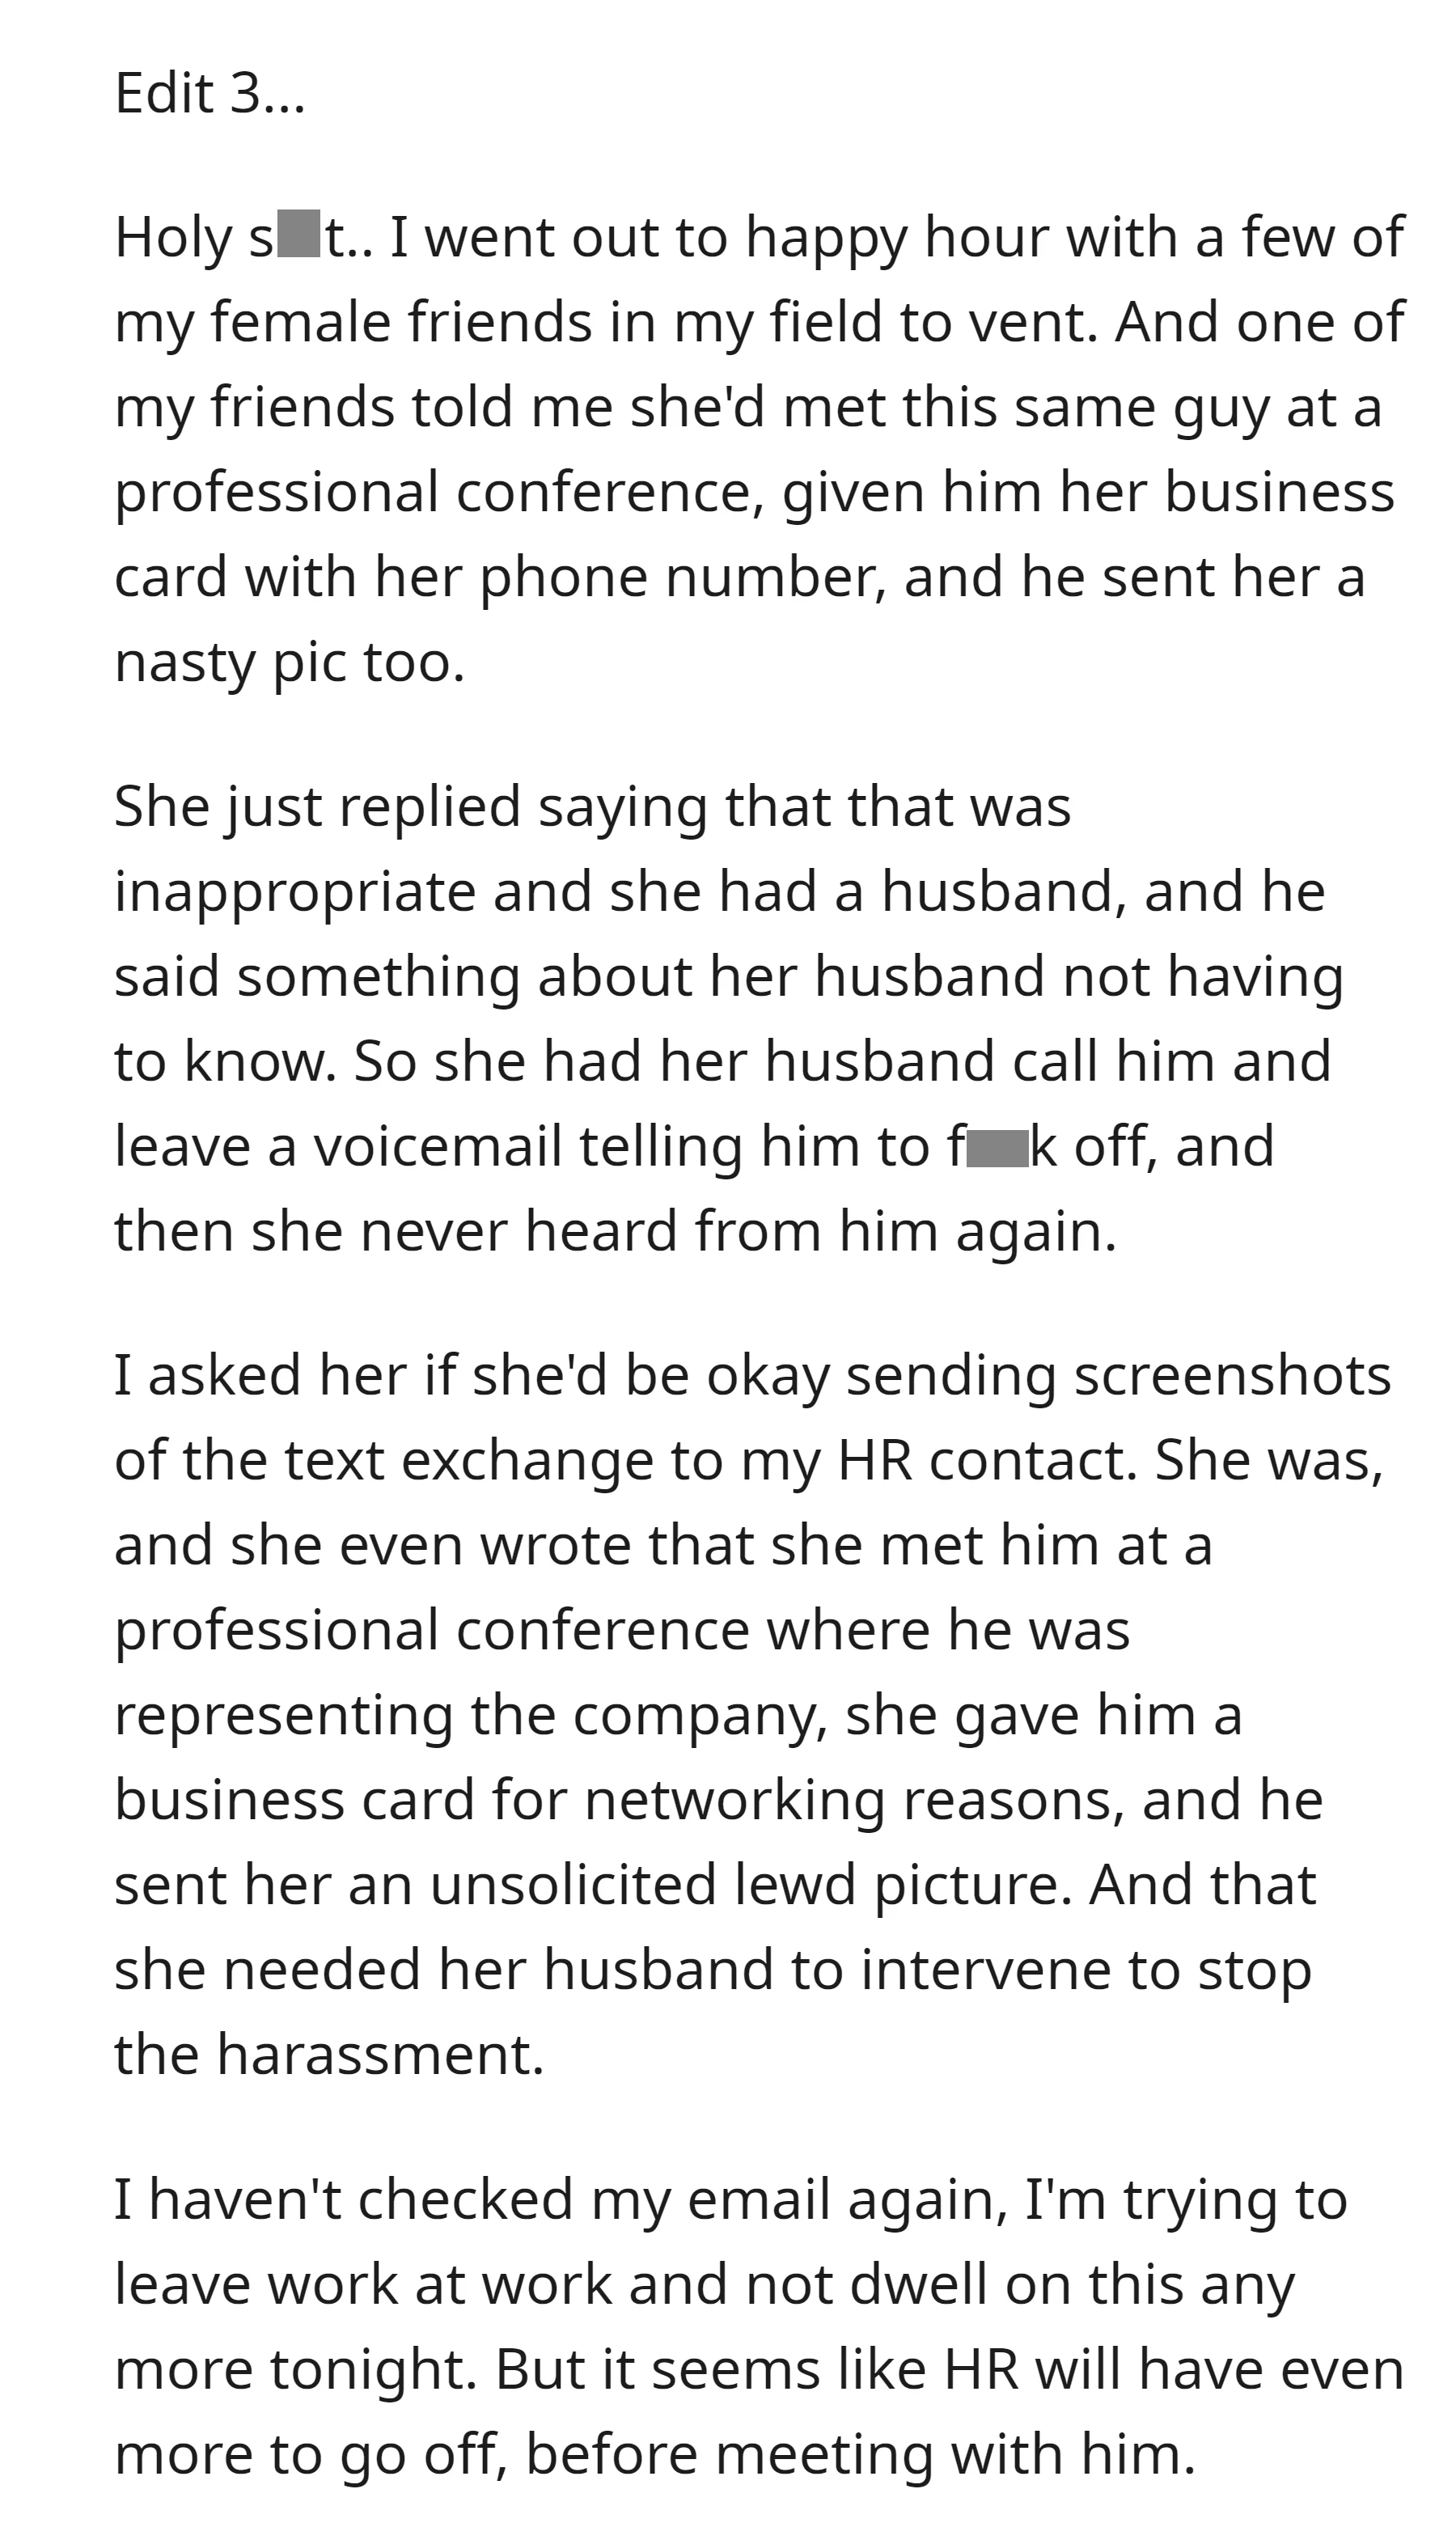 OP discovers that the same coworker harassed her friend at a professional conference